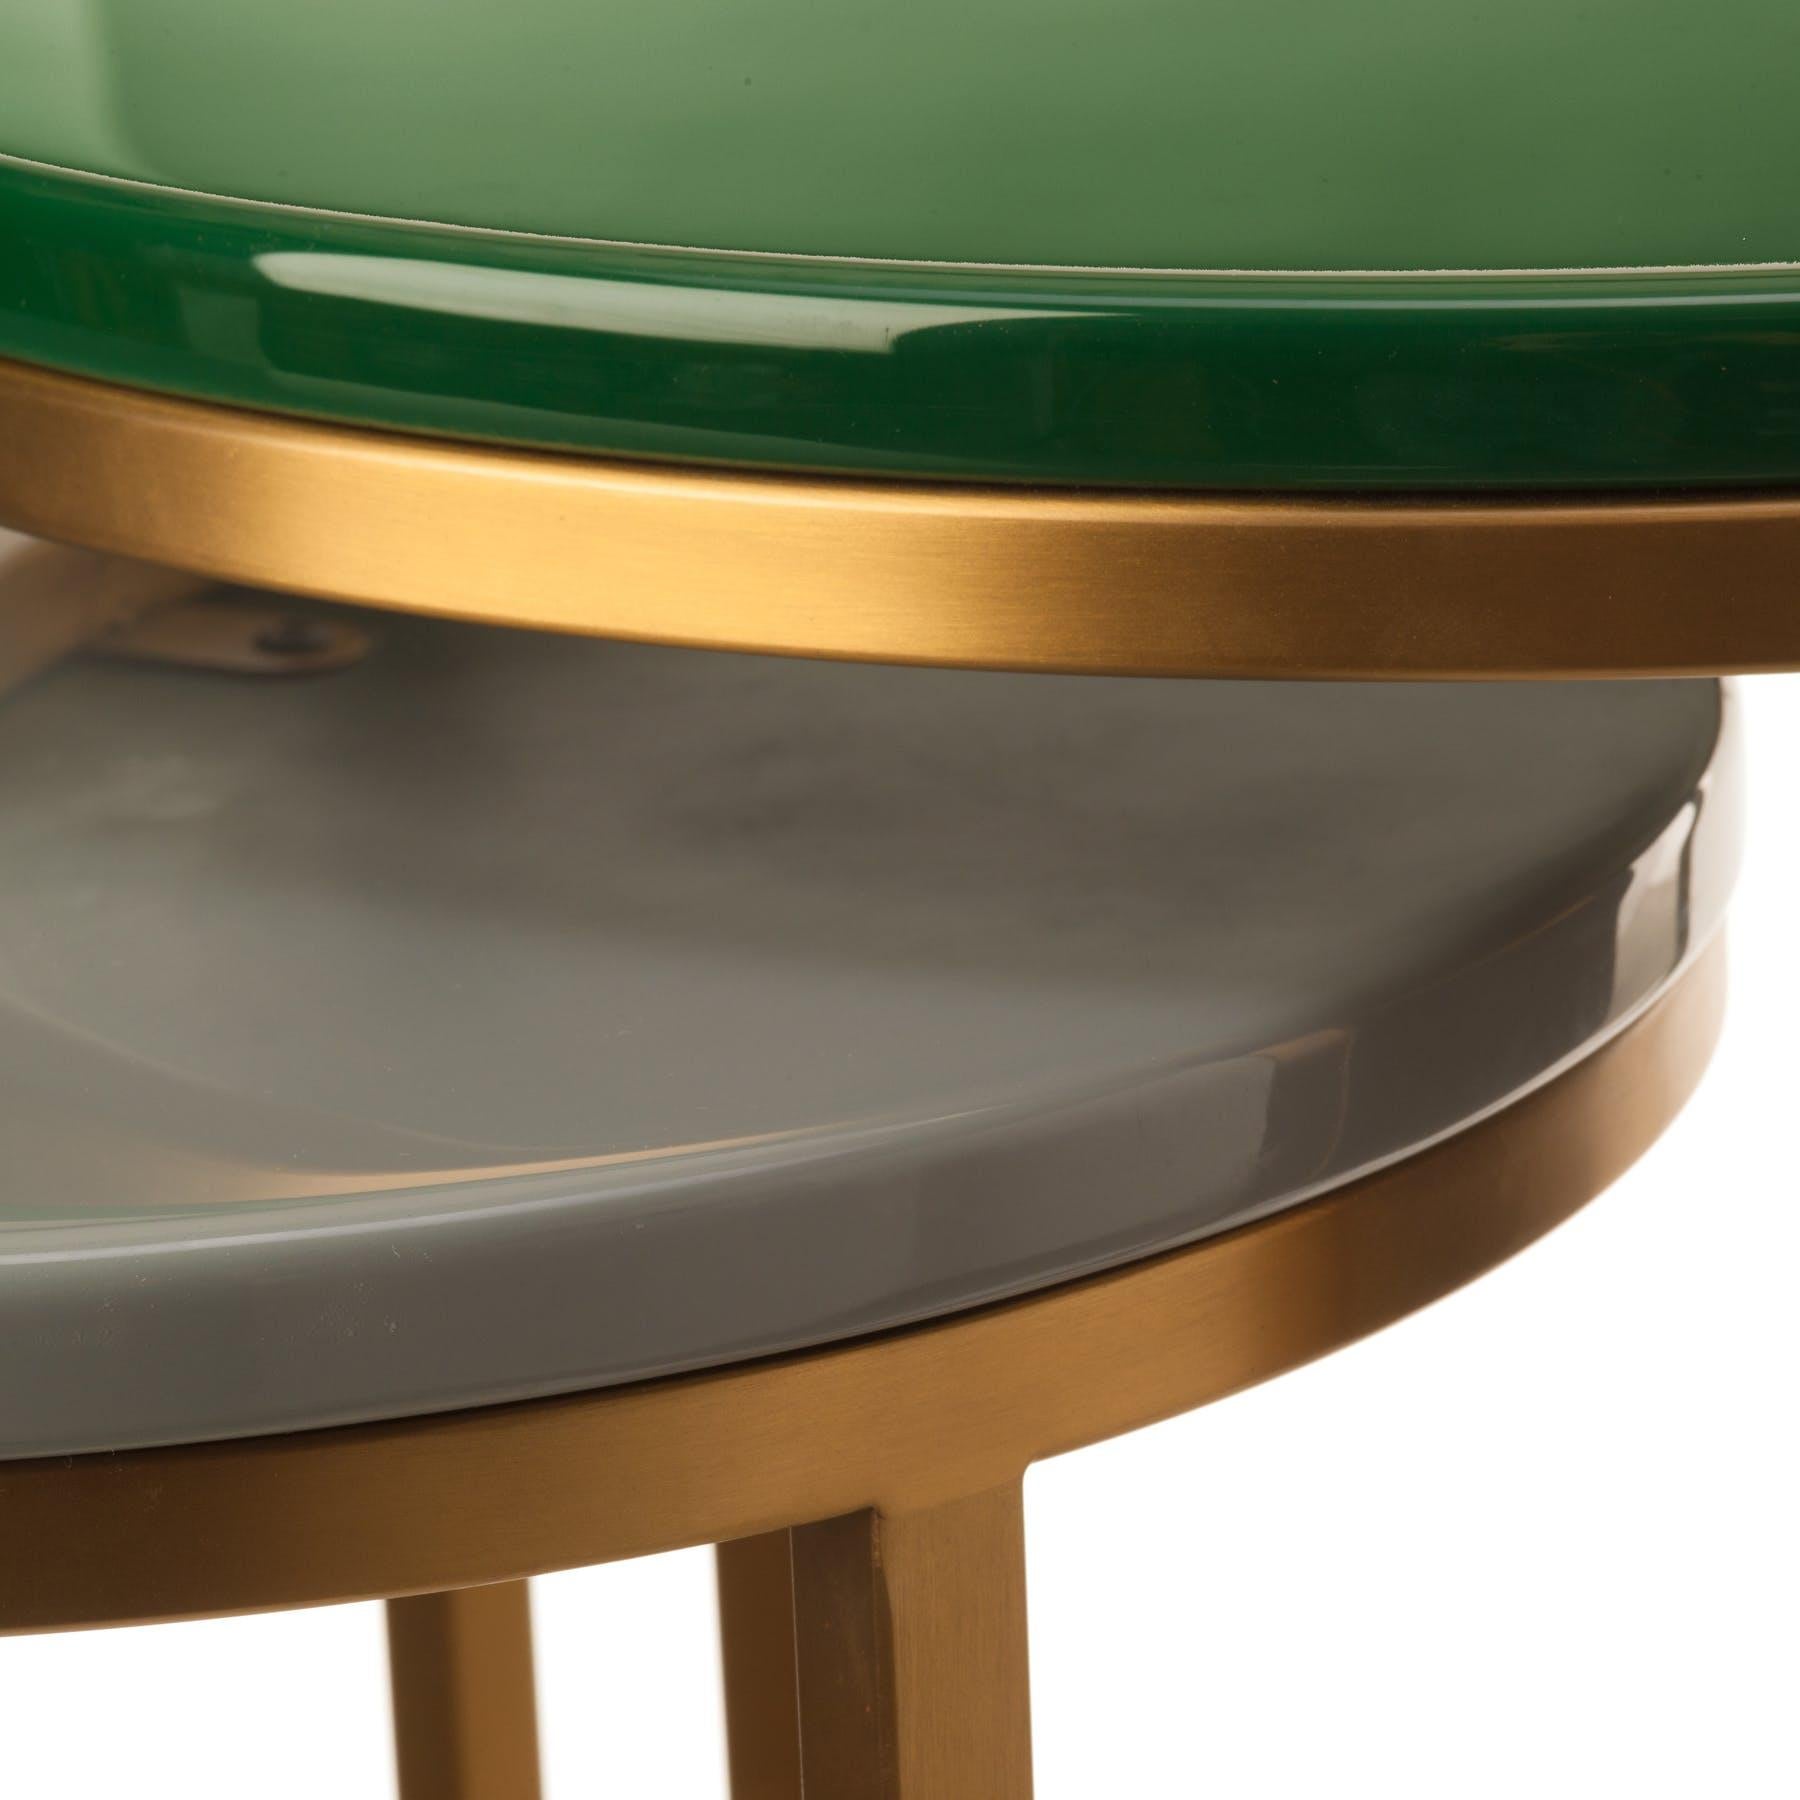 Modern glossy side table - Pols Potten Studio
Dimensions: 33 diameter x height 48 cm
Materials: Brushed gold-plated, stainless steel frame, resin top


Pols Potten products are characterized by a modern twist on Traditional design. Each of